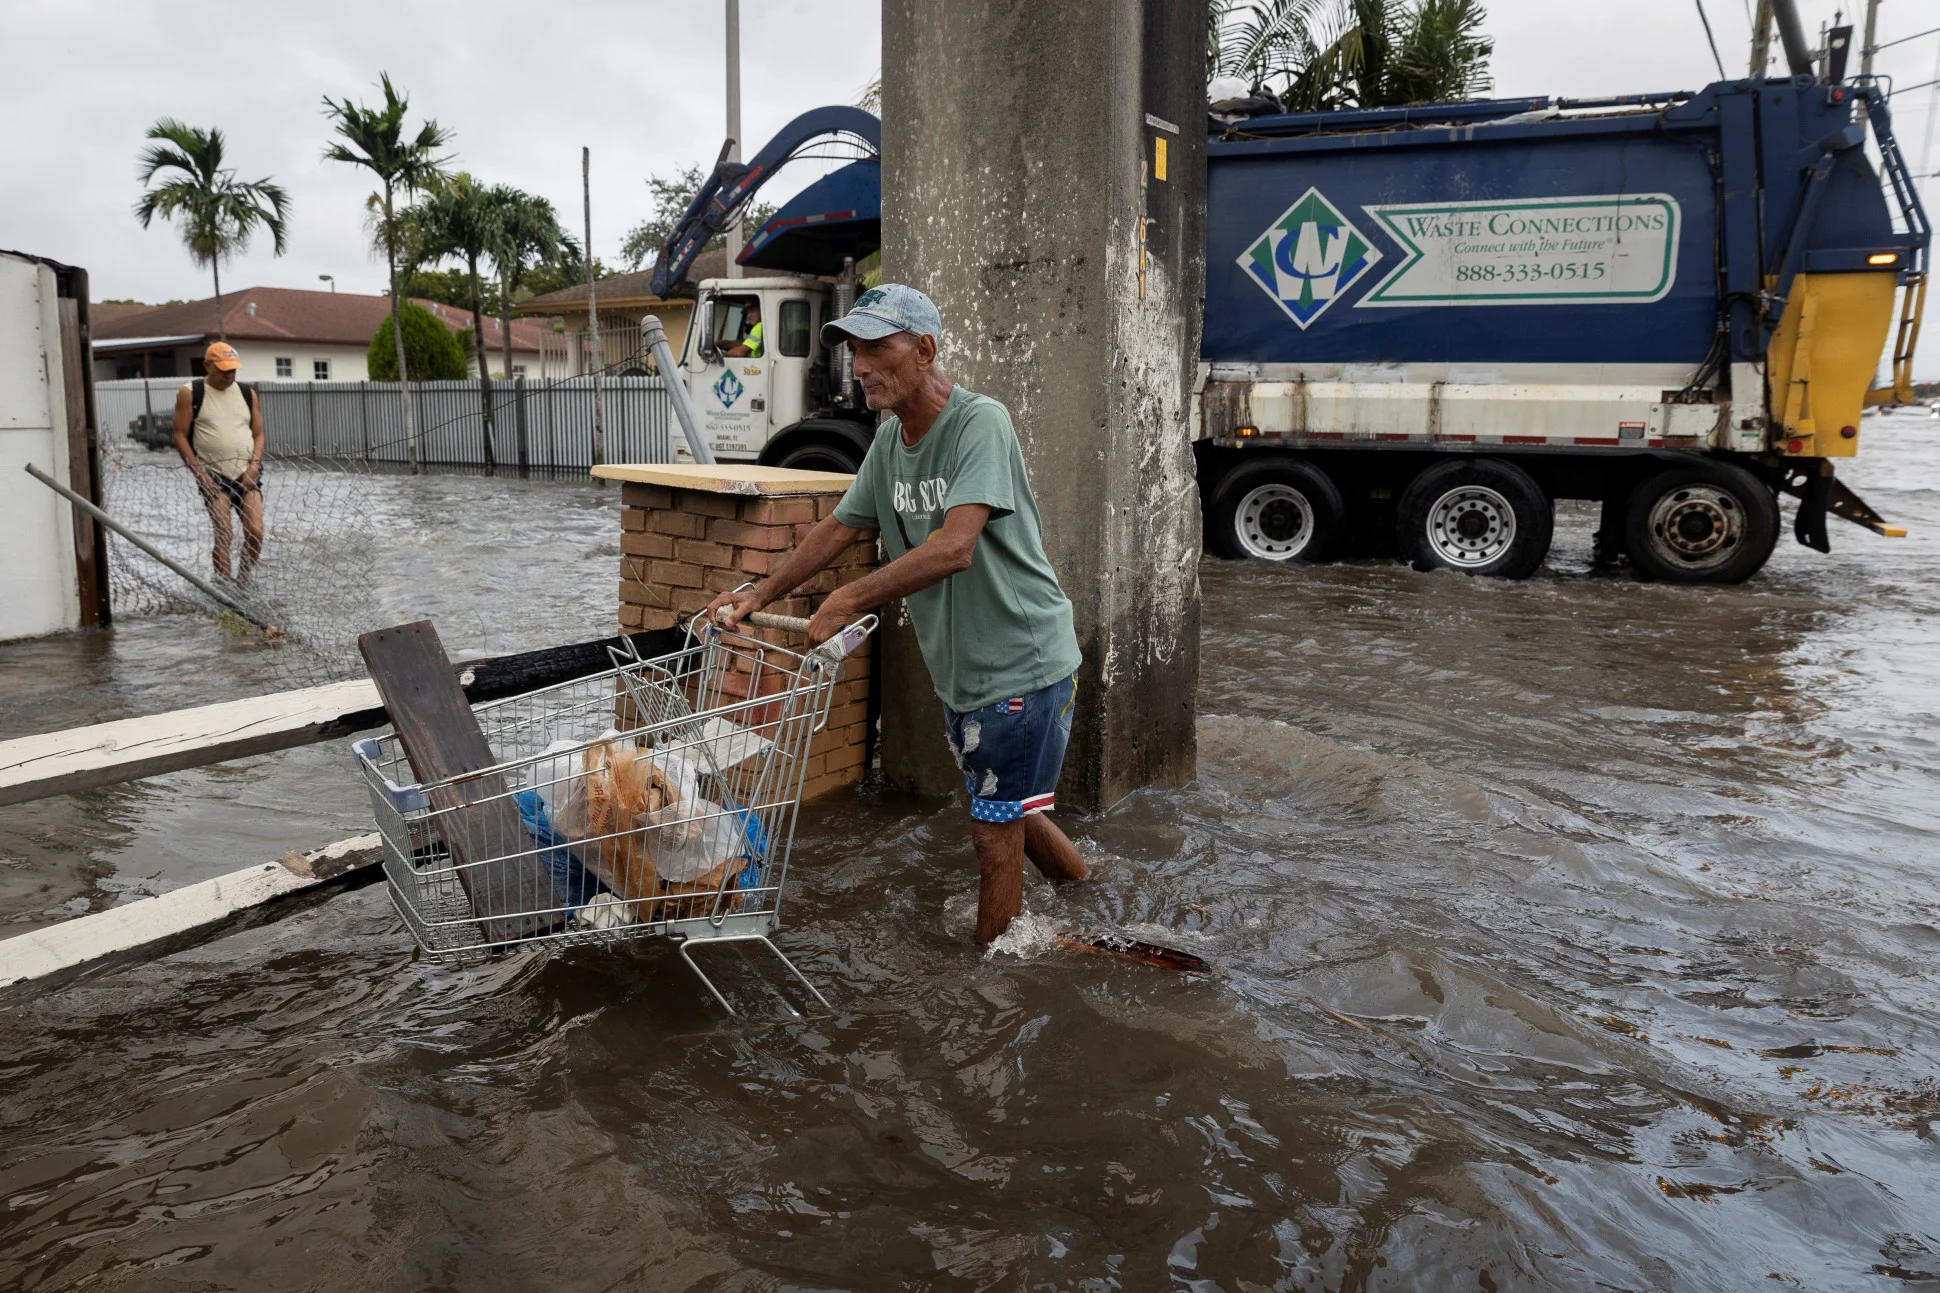 Reuters: A man pushes a cart as he walks in a flooded street in Hialeah, Florida, U.S., November 16, 2023. REUTERS/Marco Bello